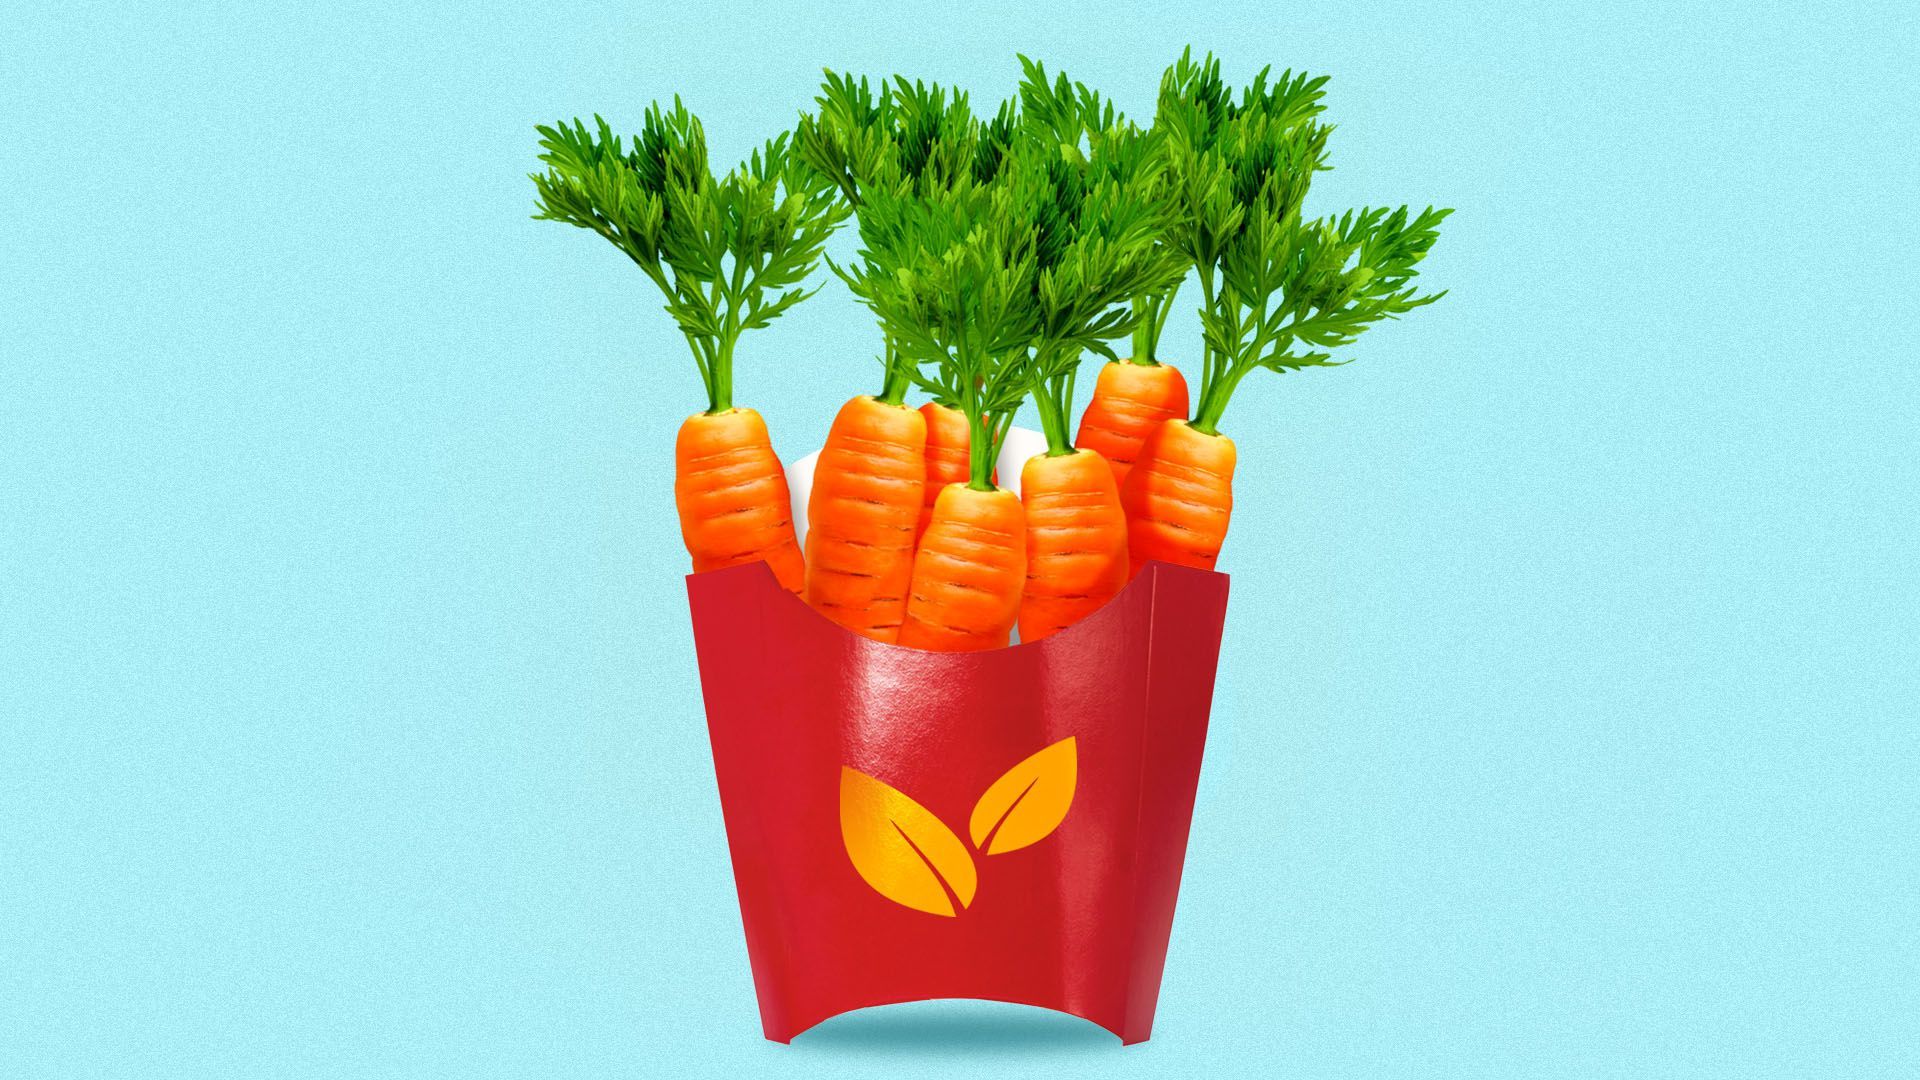 Illustration of a fast food french fry container full of carrots 